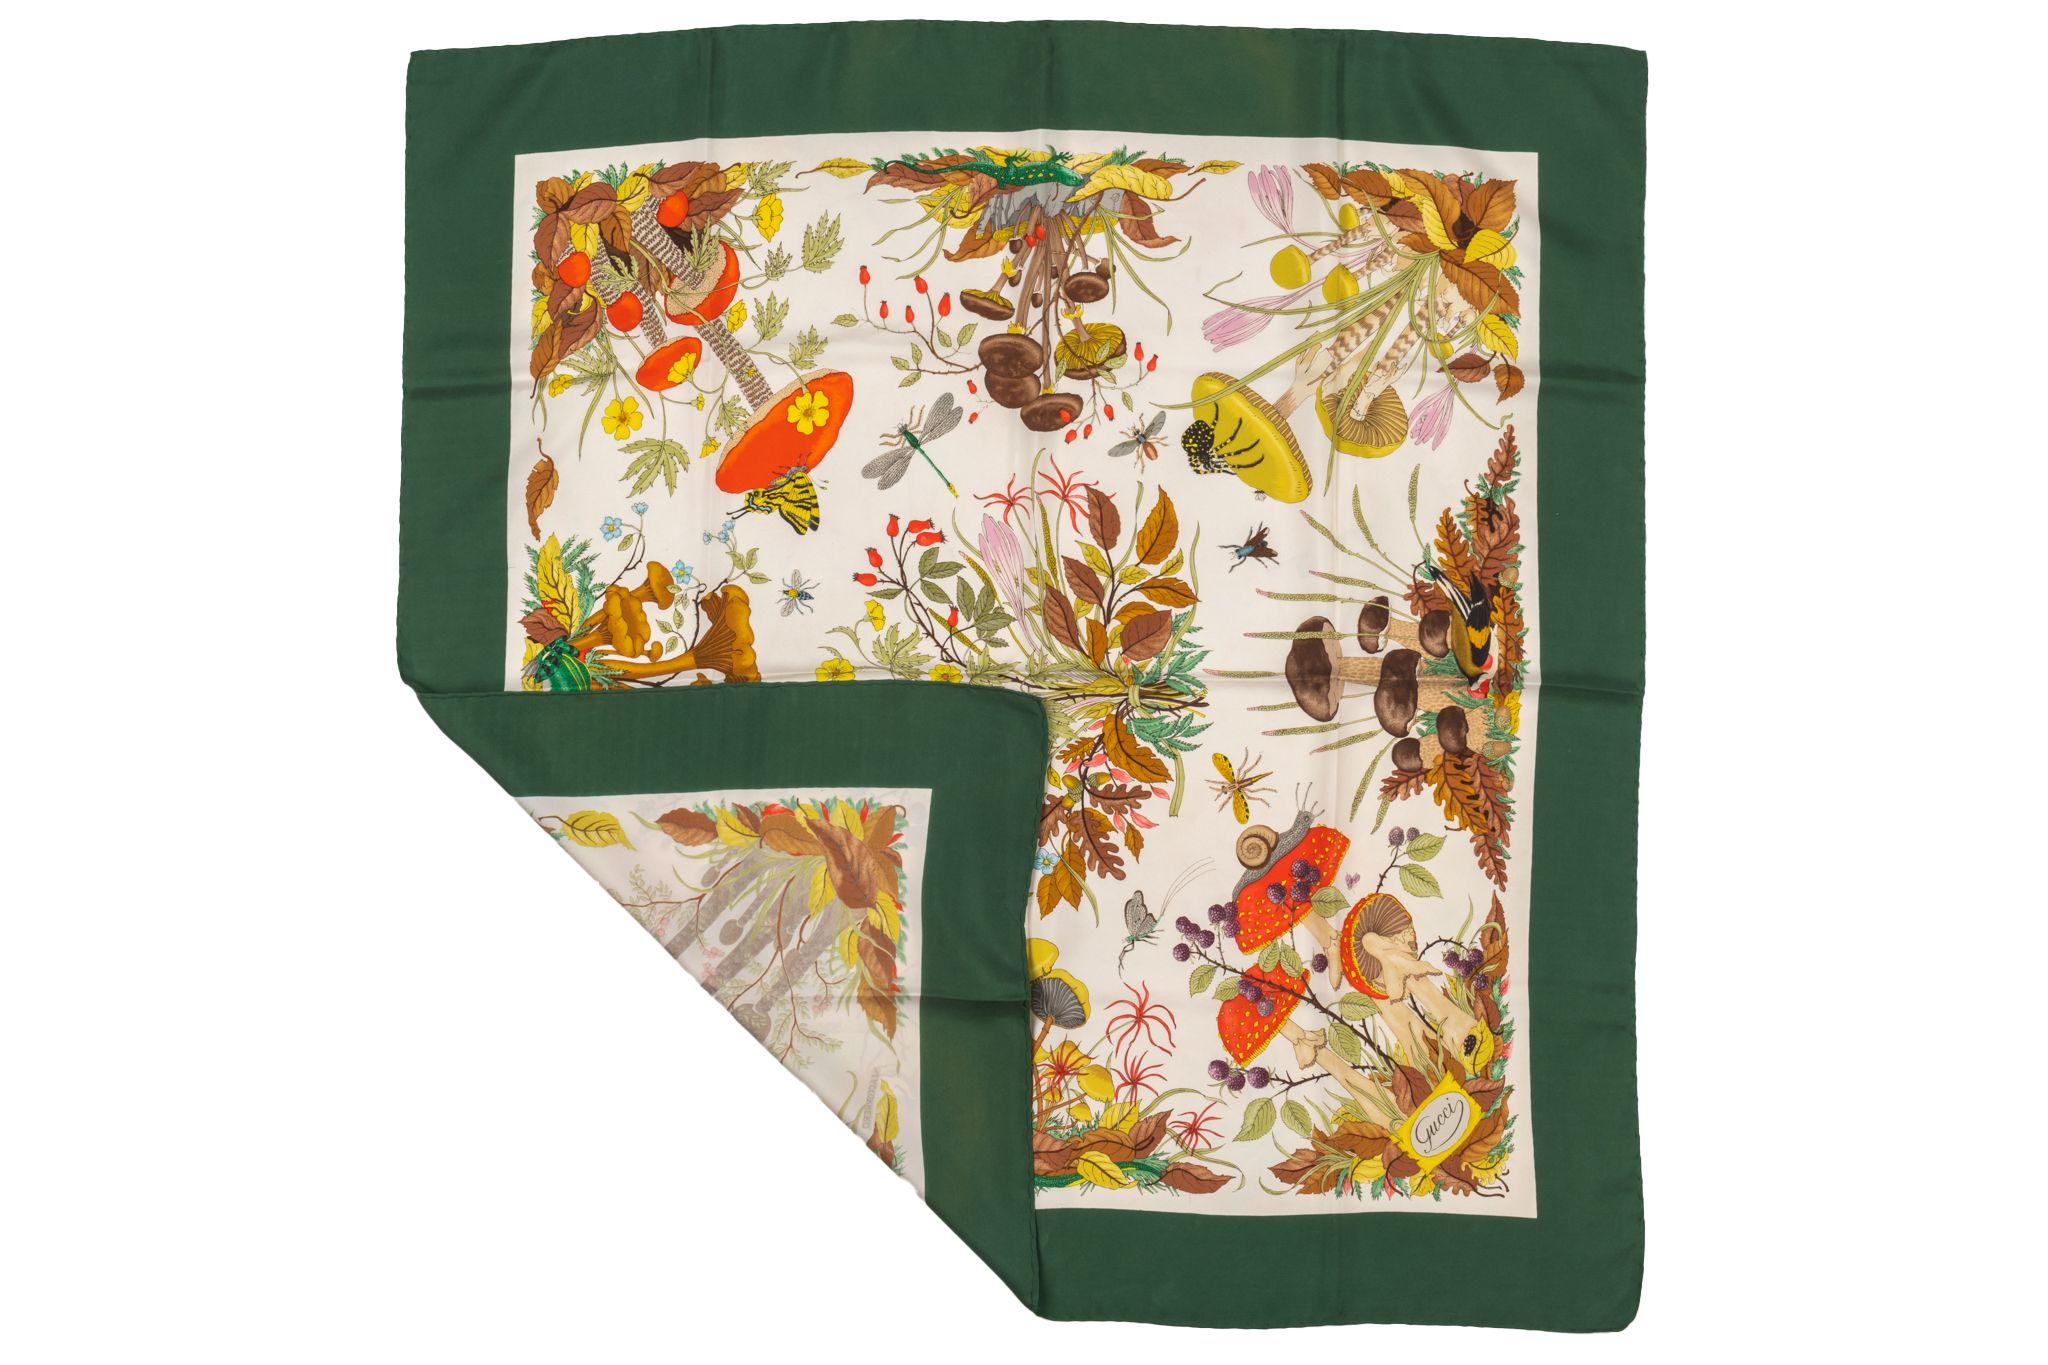 Gucci pre-owned silk scarf with an accornero pattern of mushrooms. The scarf is framed with an olive green edge. Item is in excellent condition.